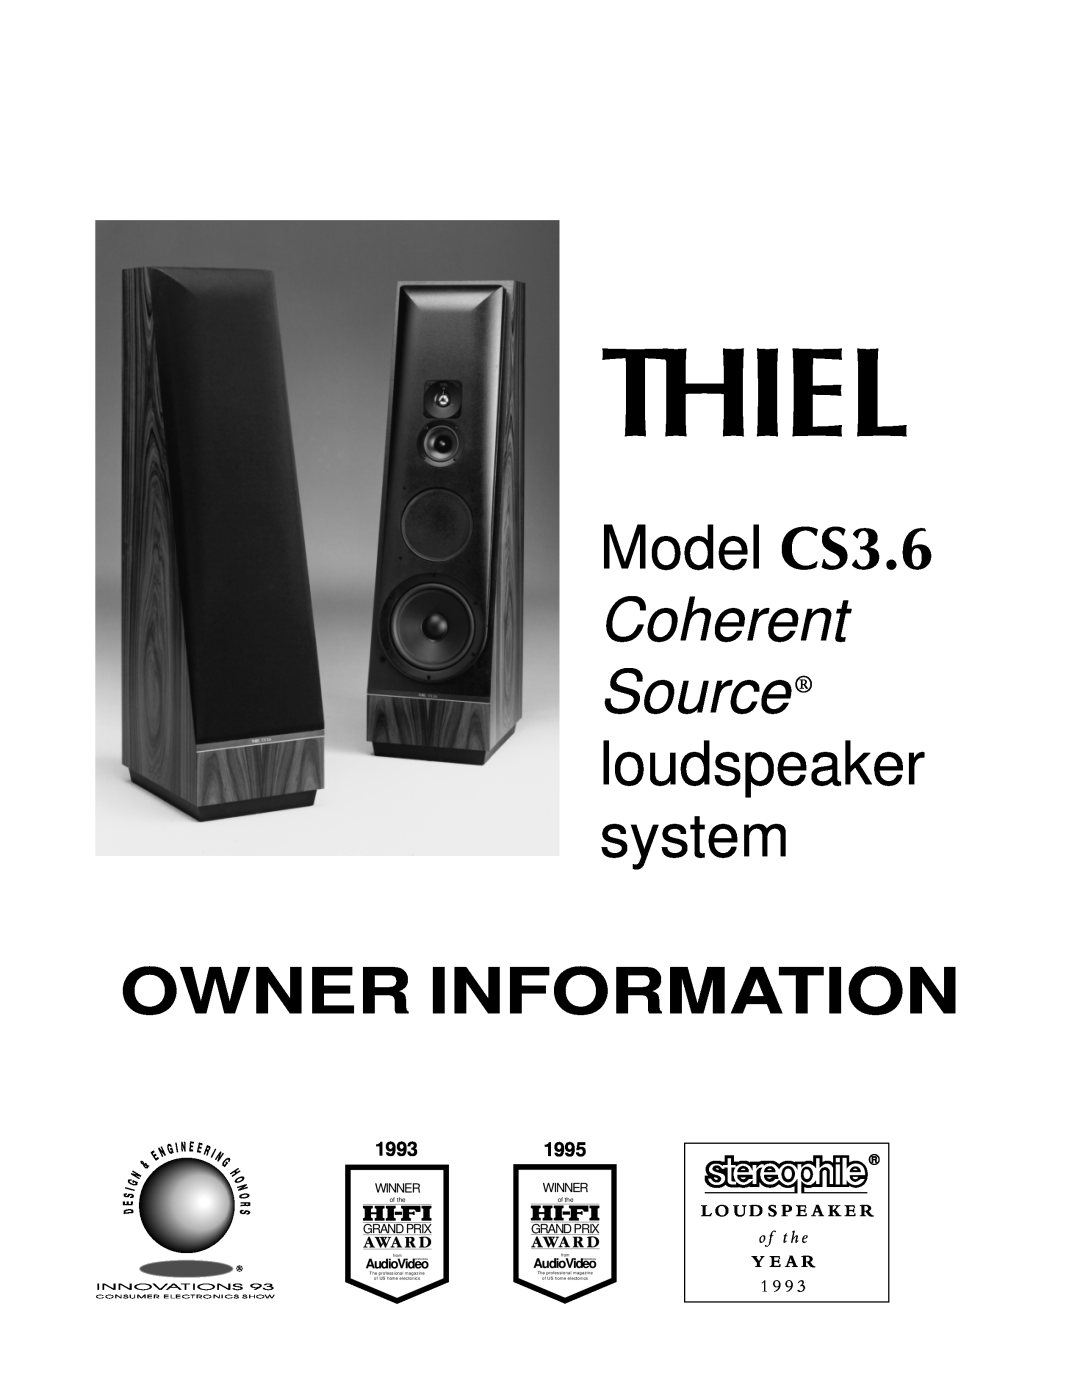 Thiel Audio Products manual Thiel, Owner Information, Model CS3.6 Coherent Source loudspeaker system, 1993, 1995, from 